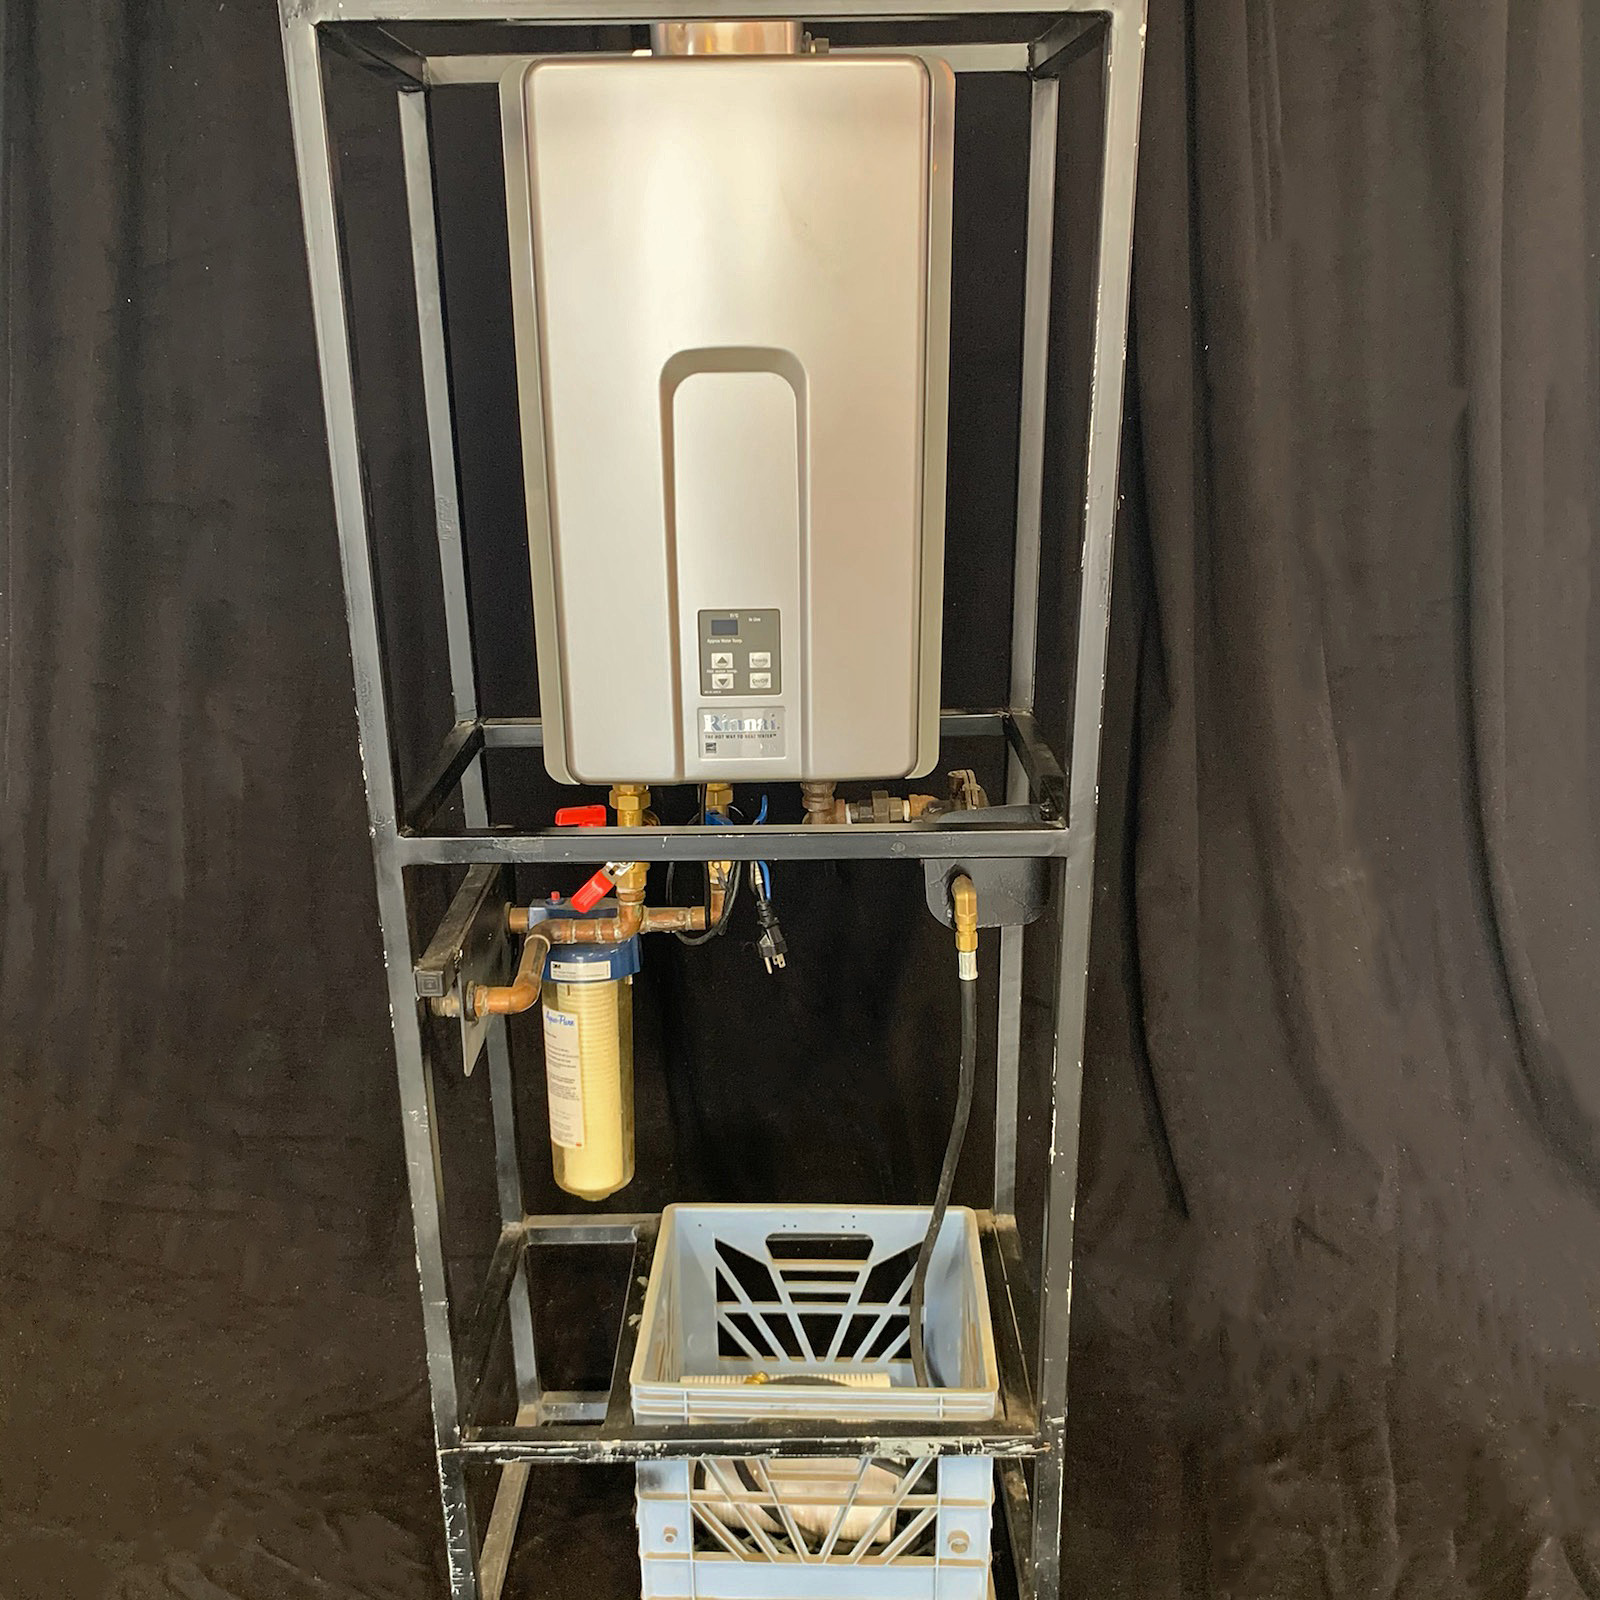 Portable On-Demand Hot Water Heater with Filter